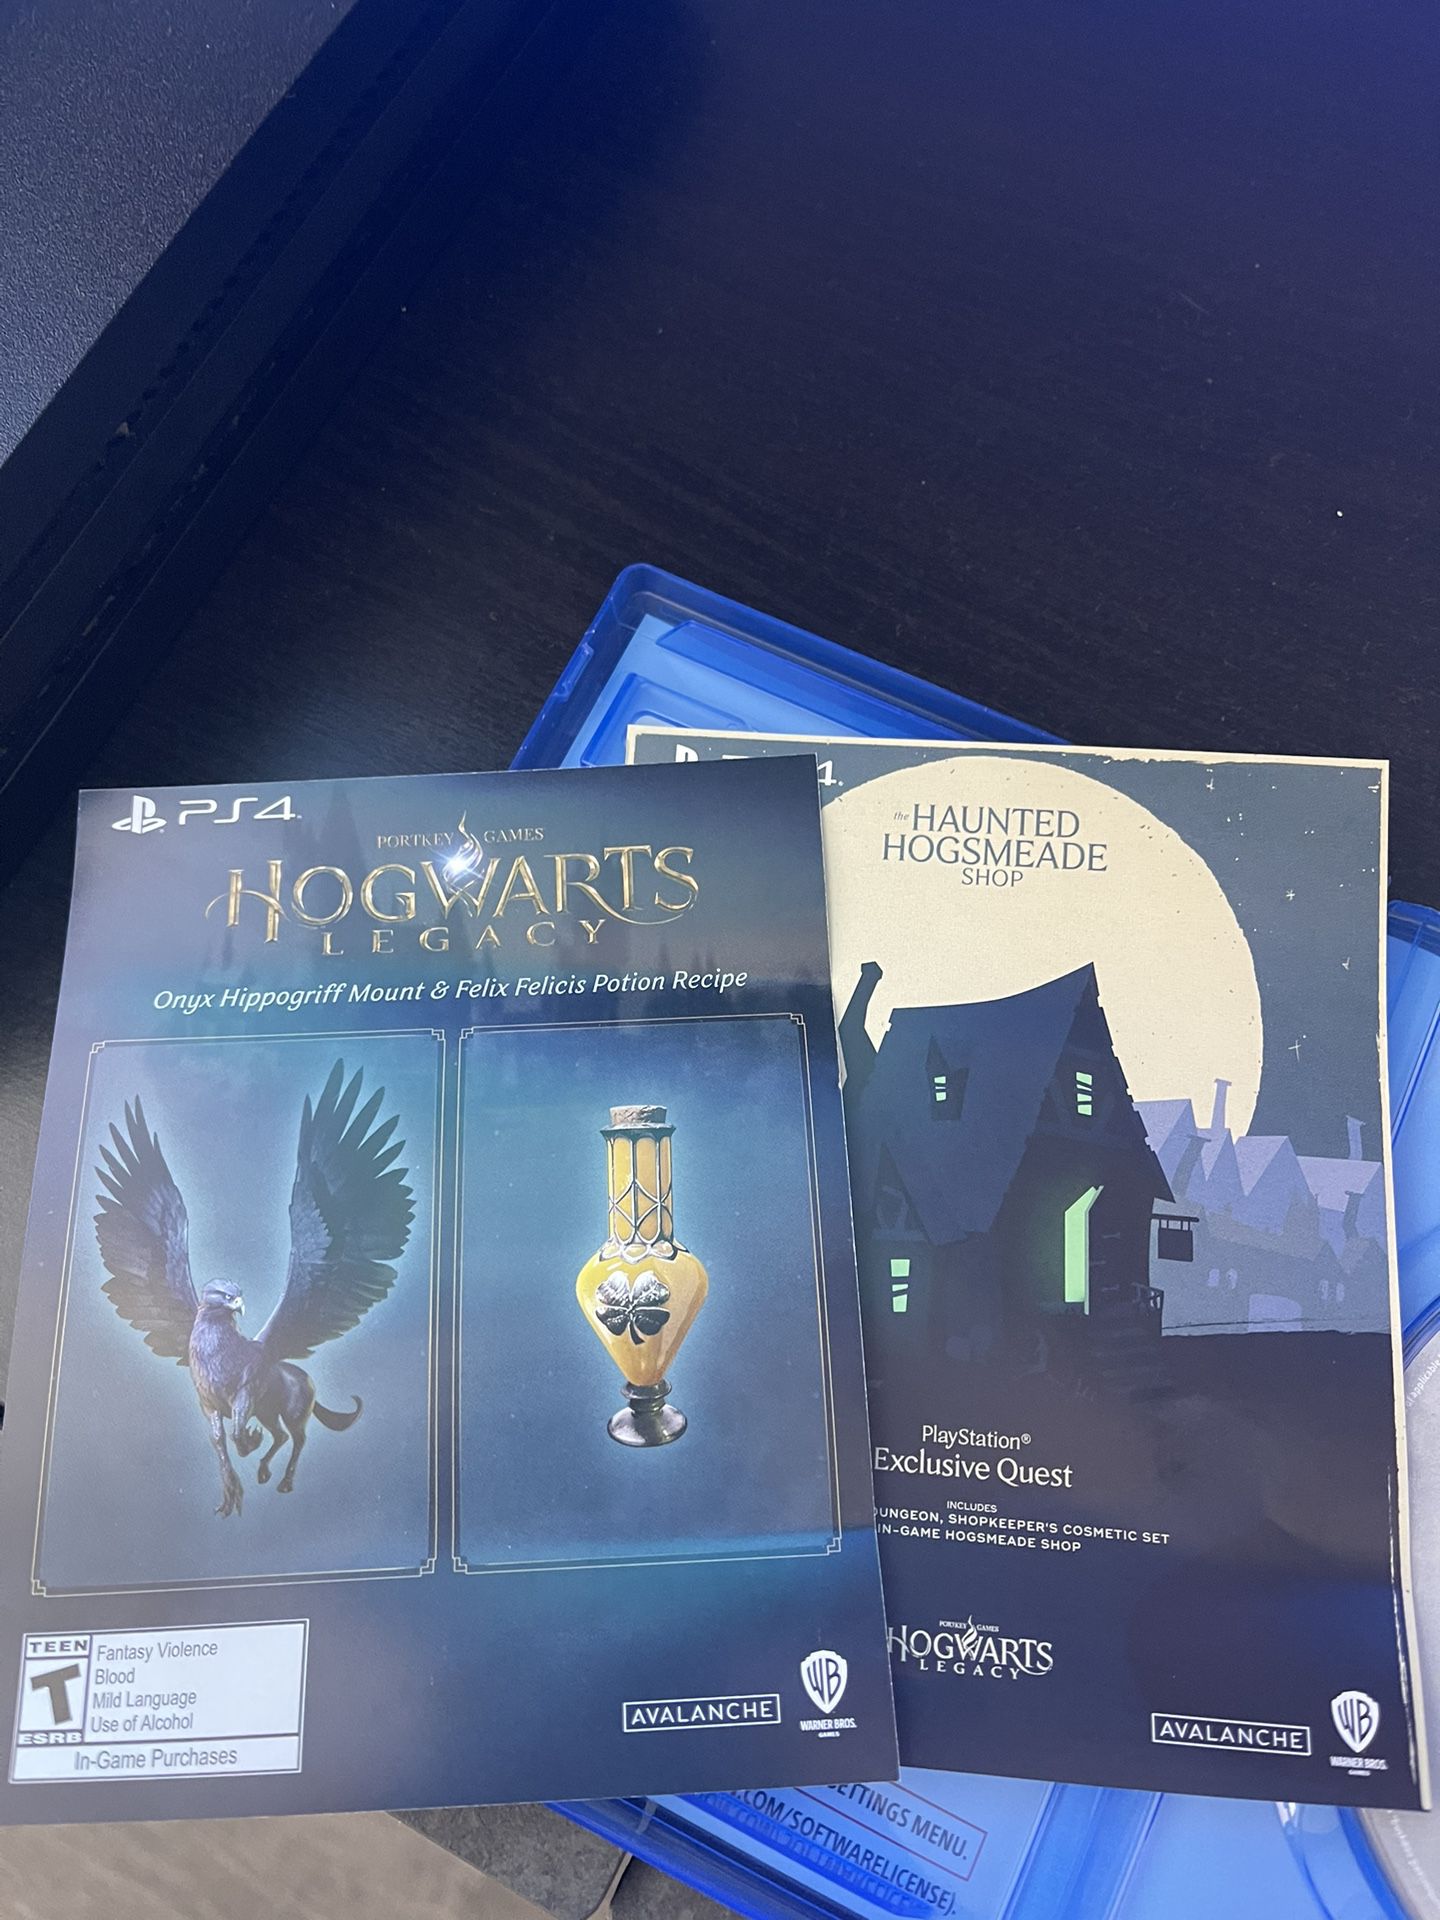 Hogwarts Legacy PS4 for Sale in Lake Worth, FL - OfferUp